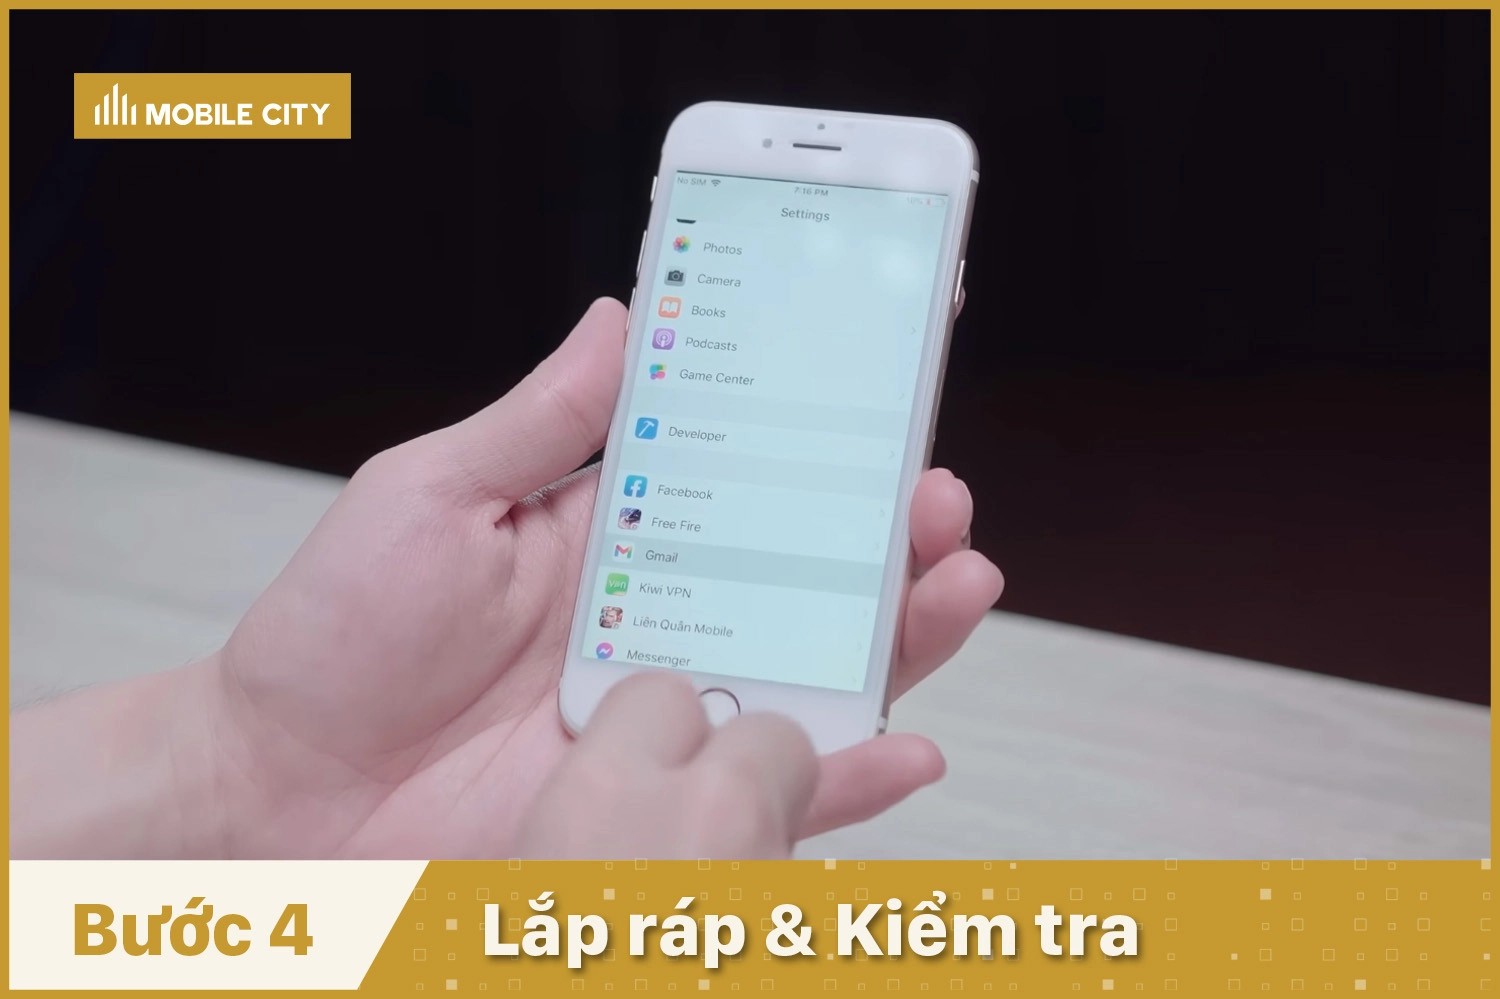 thay-cam-ung-iphone-6-uy-tin-chat-luong-lap-rap-kiem-tra